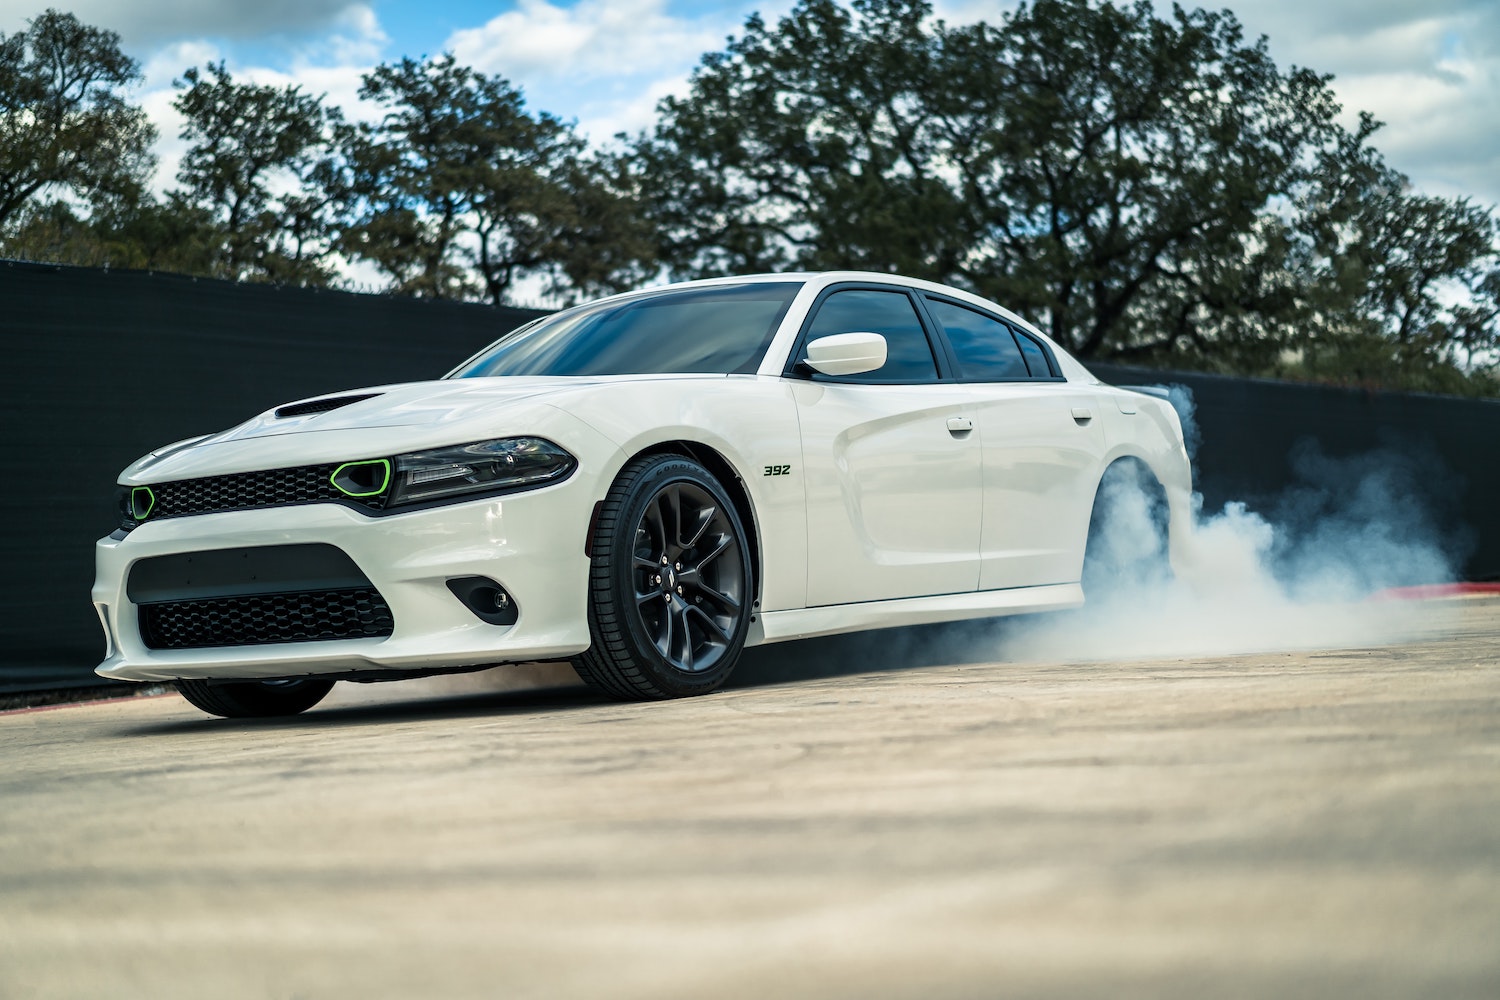 A white Dodge Charger spinning its wheels, showing off just how much horsepower it actually has